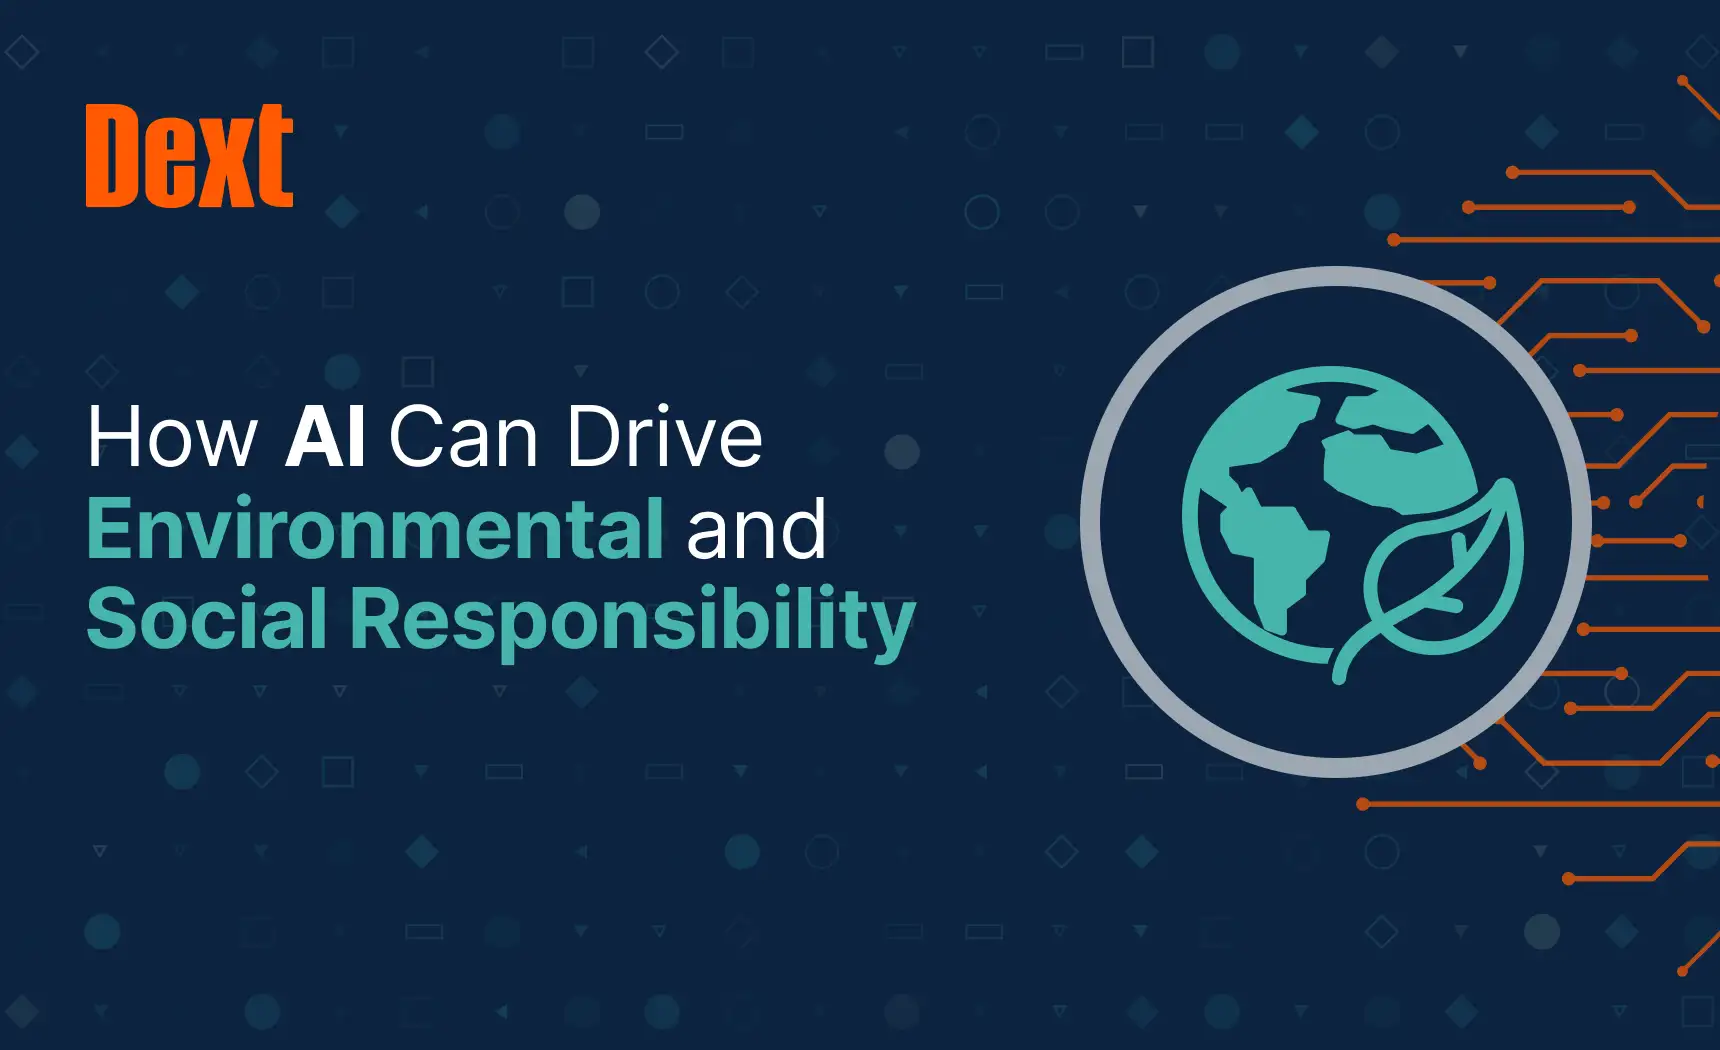 Dext: How AI Can Drive Environmental and Social Responsibility logo